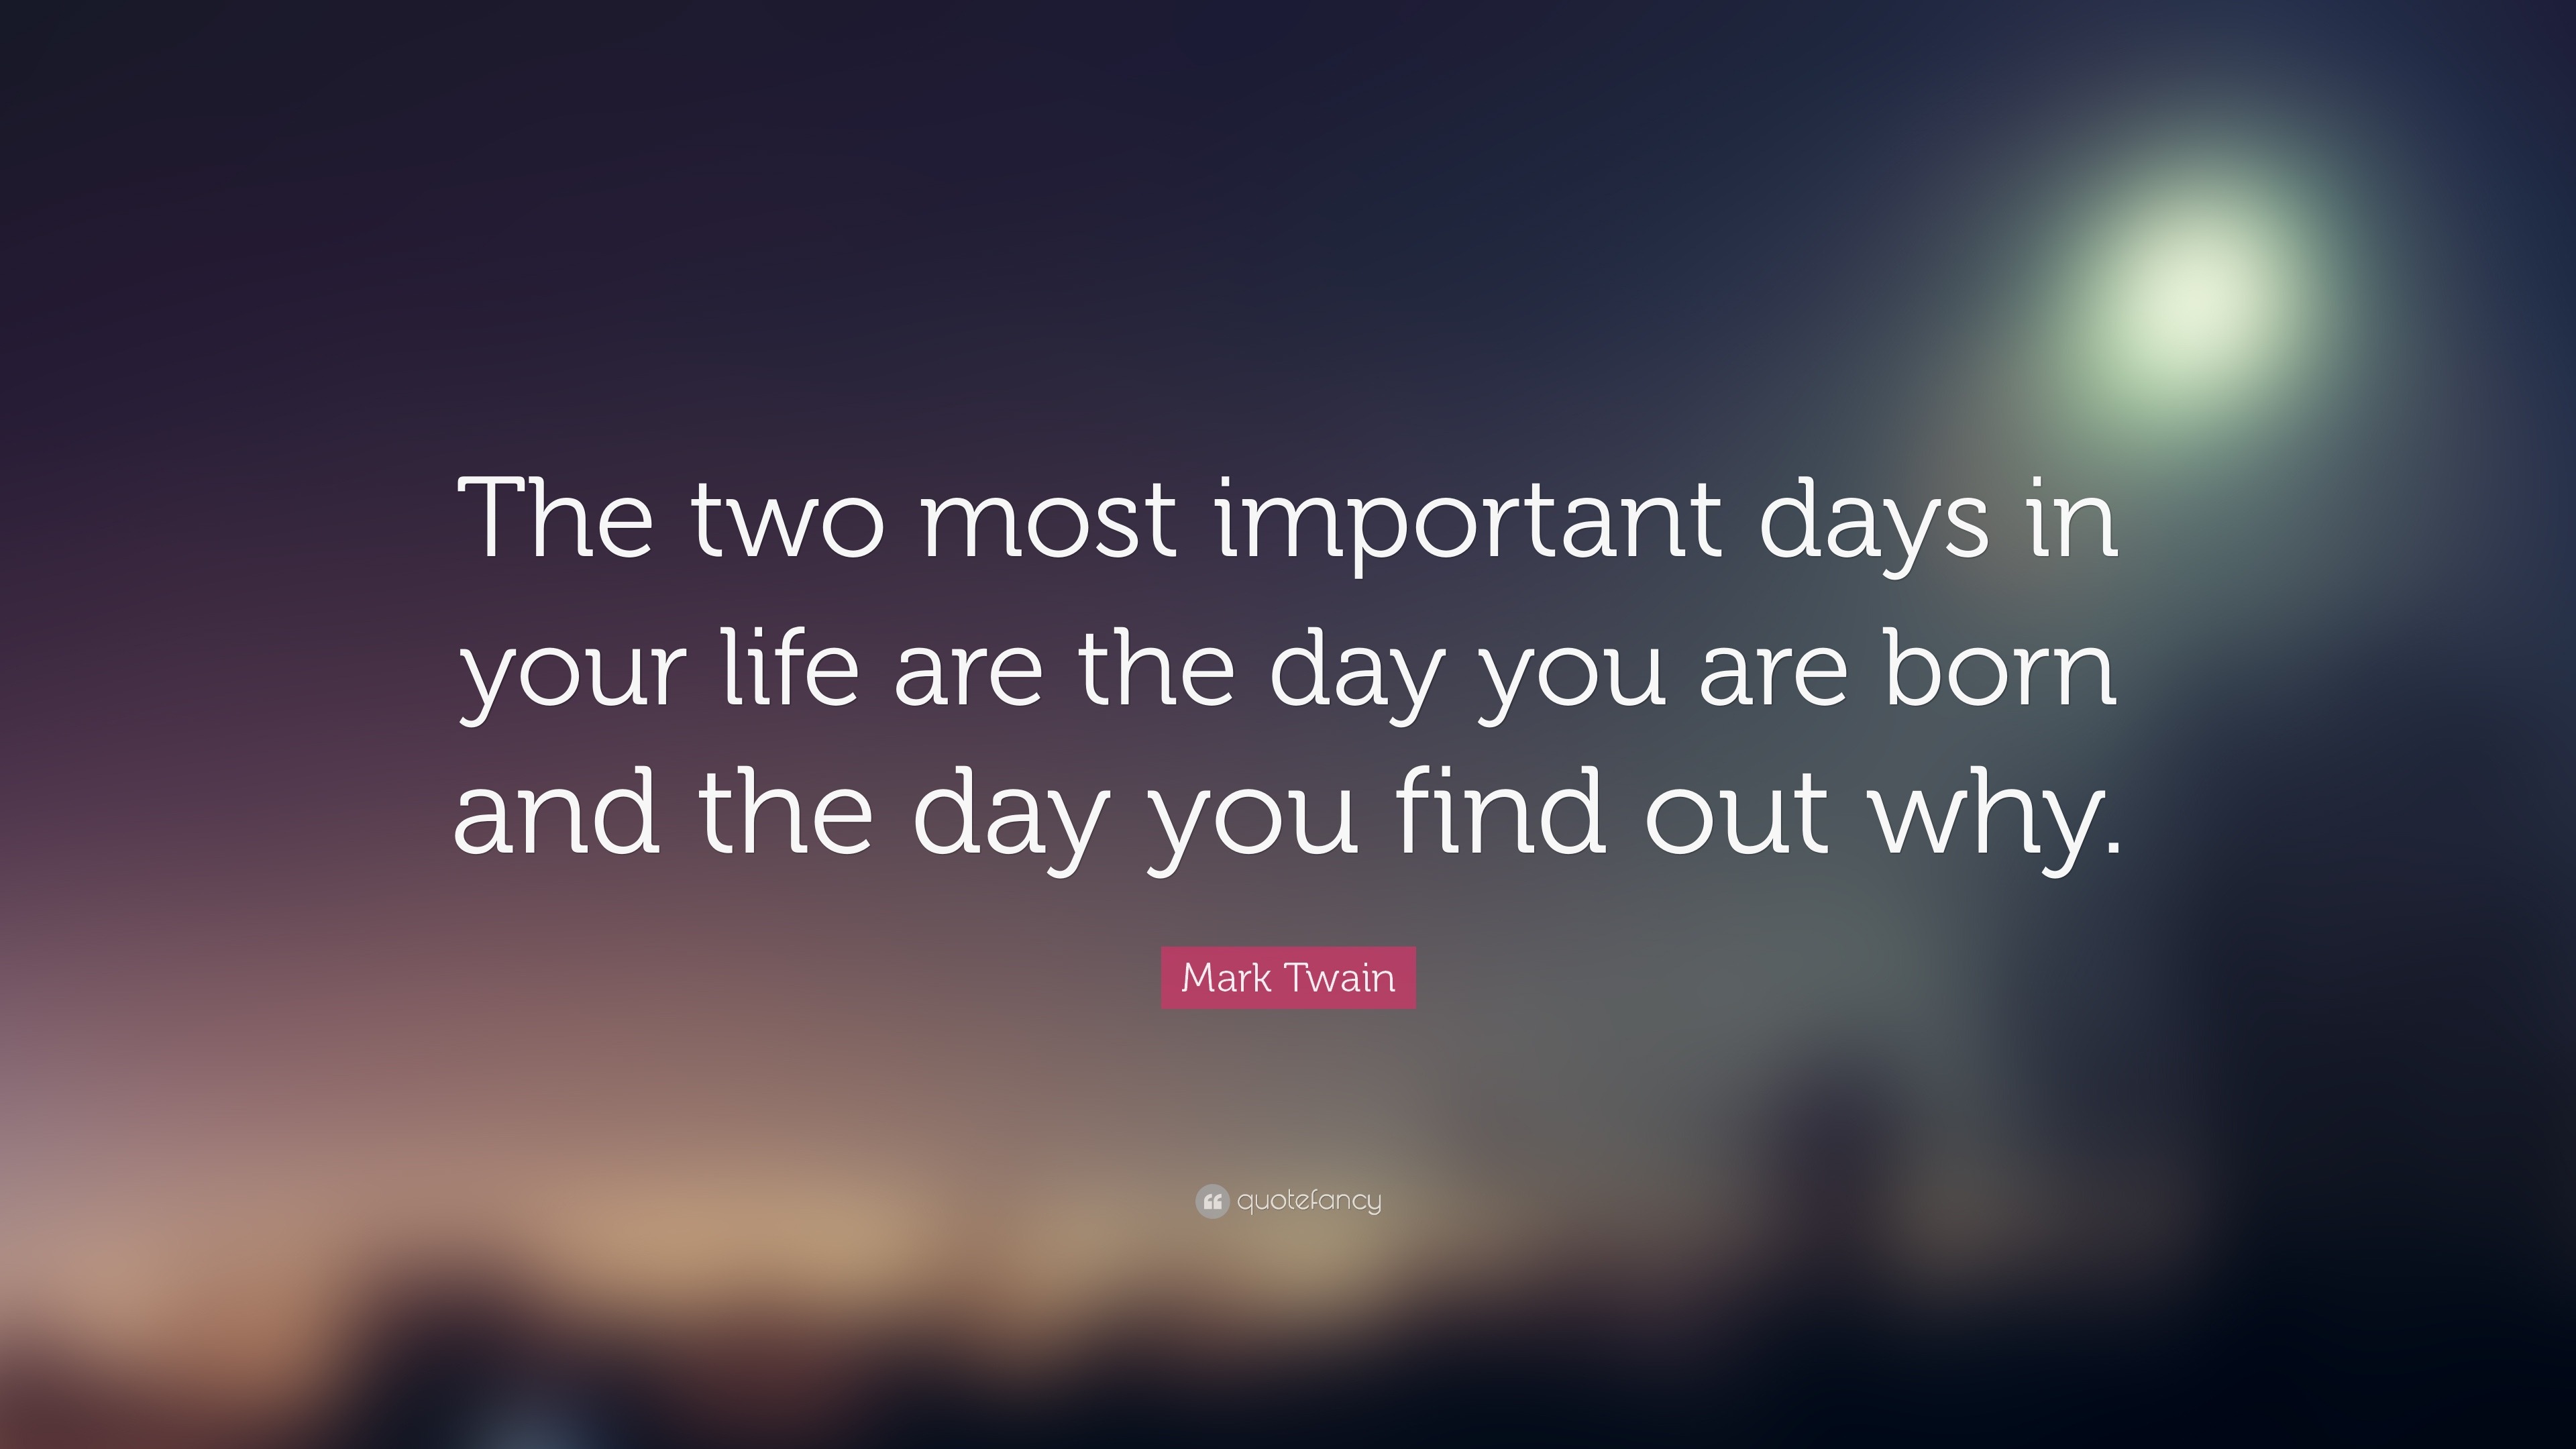 Mark Twain Quote: "The two most important days in your ...